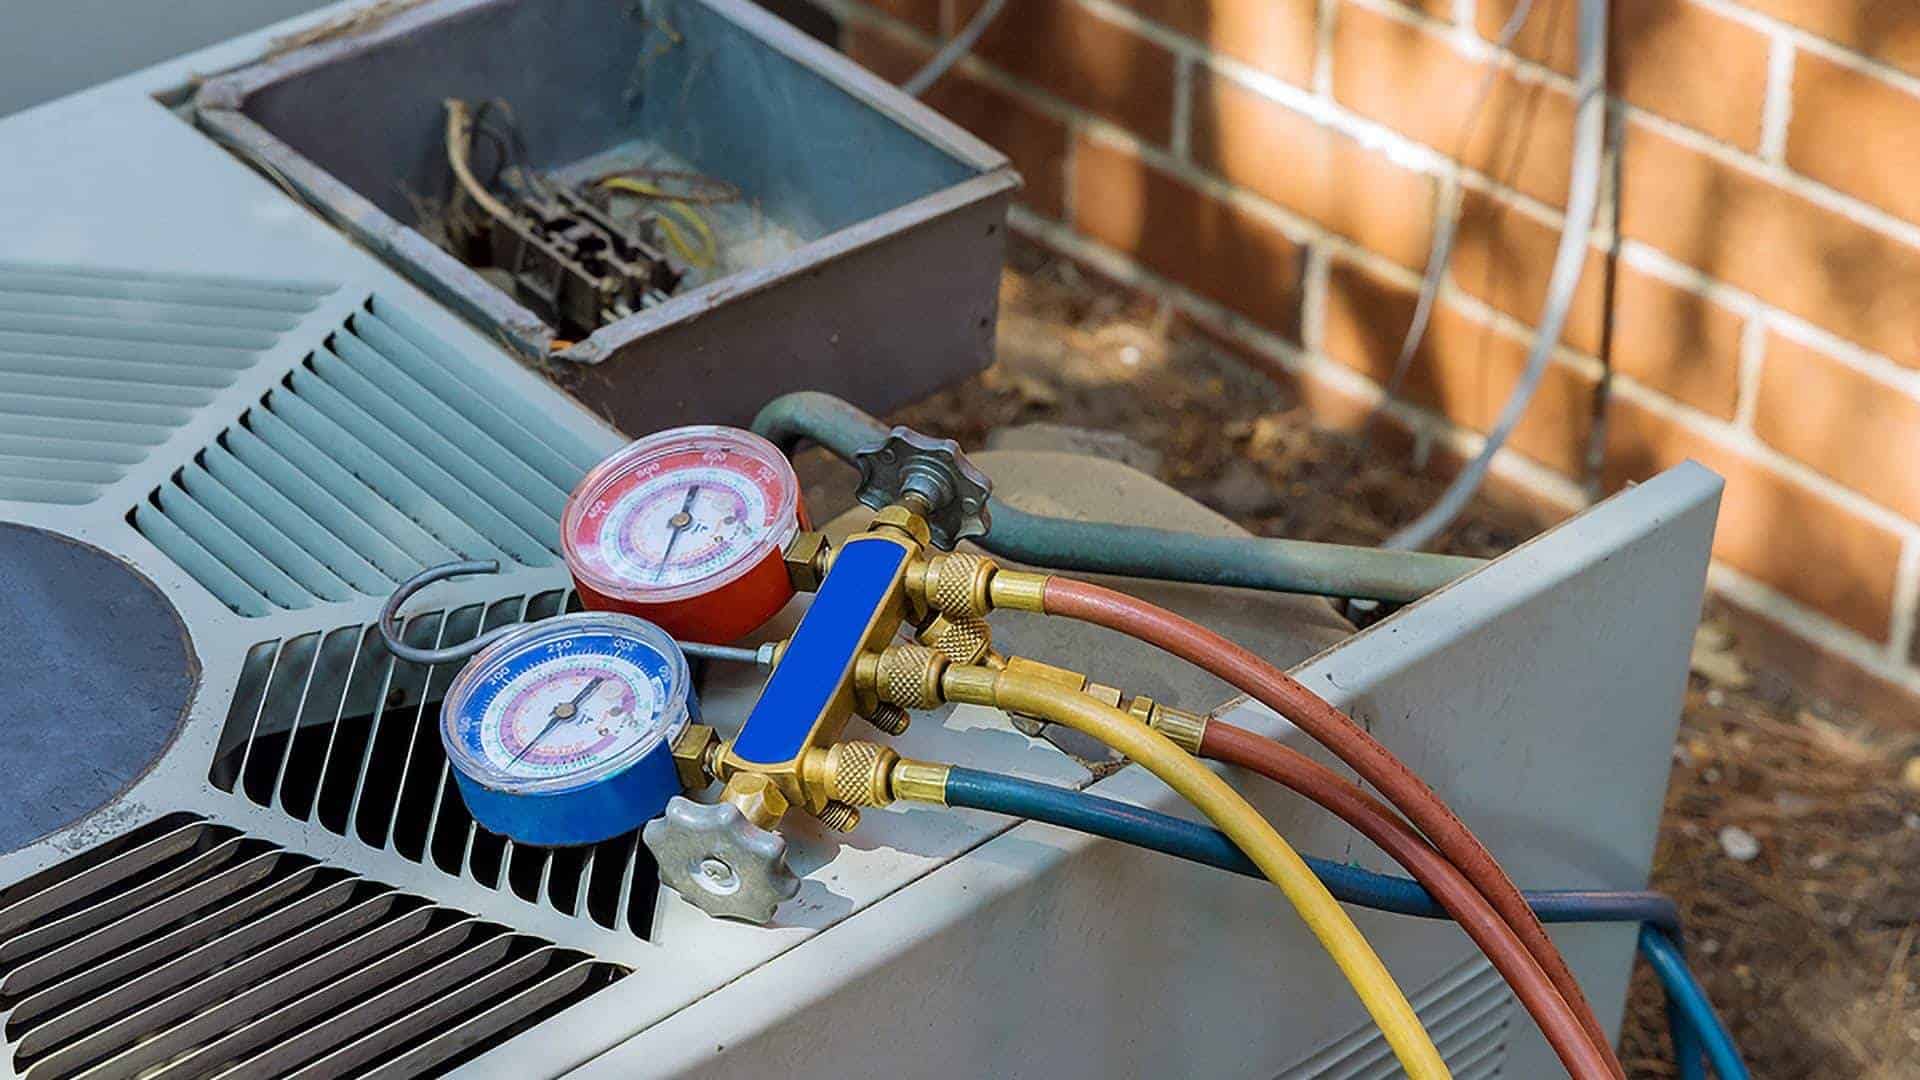 Denver Air Conditioning Repair - UniColorado Heating and Cooling